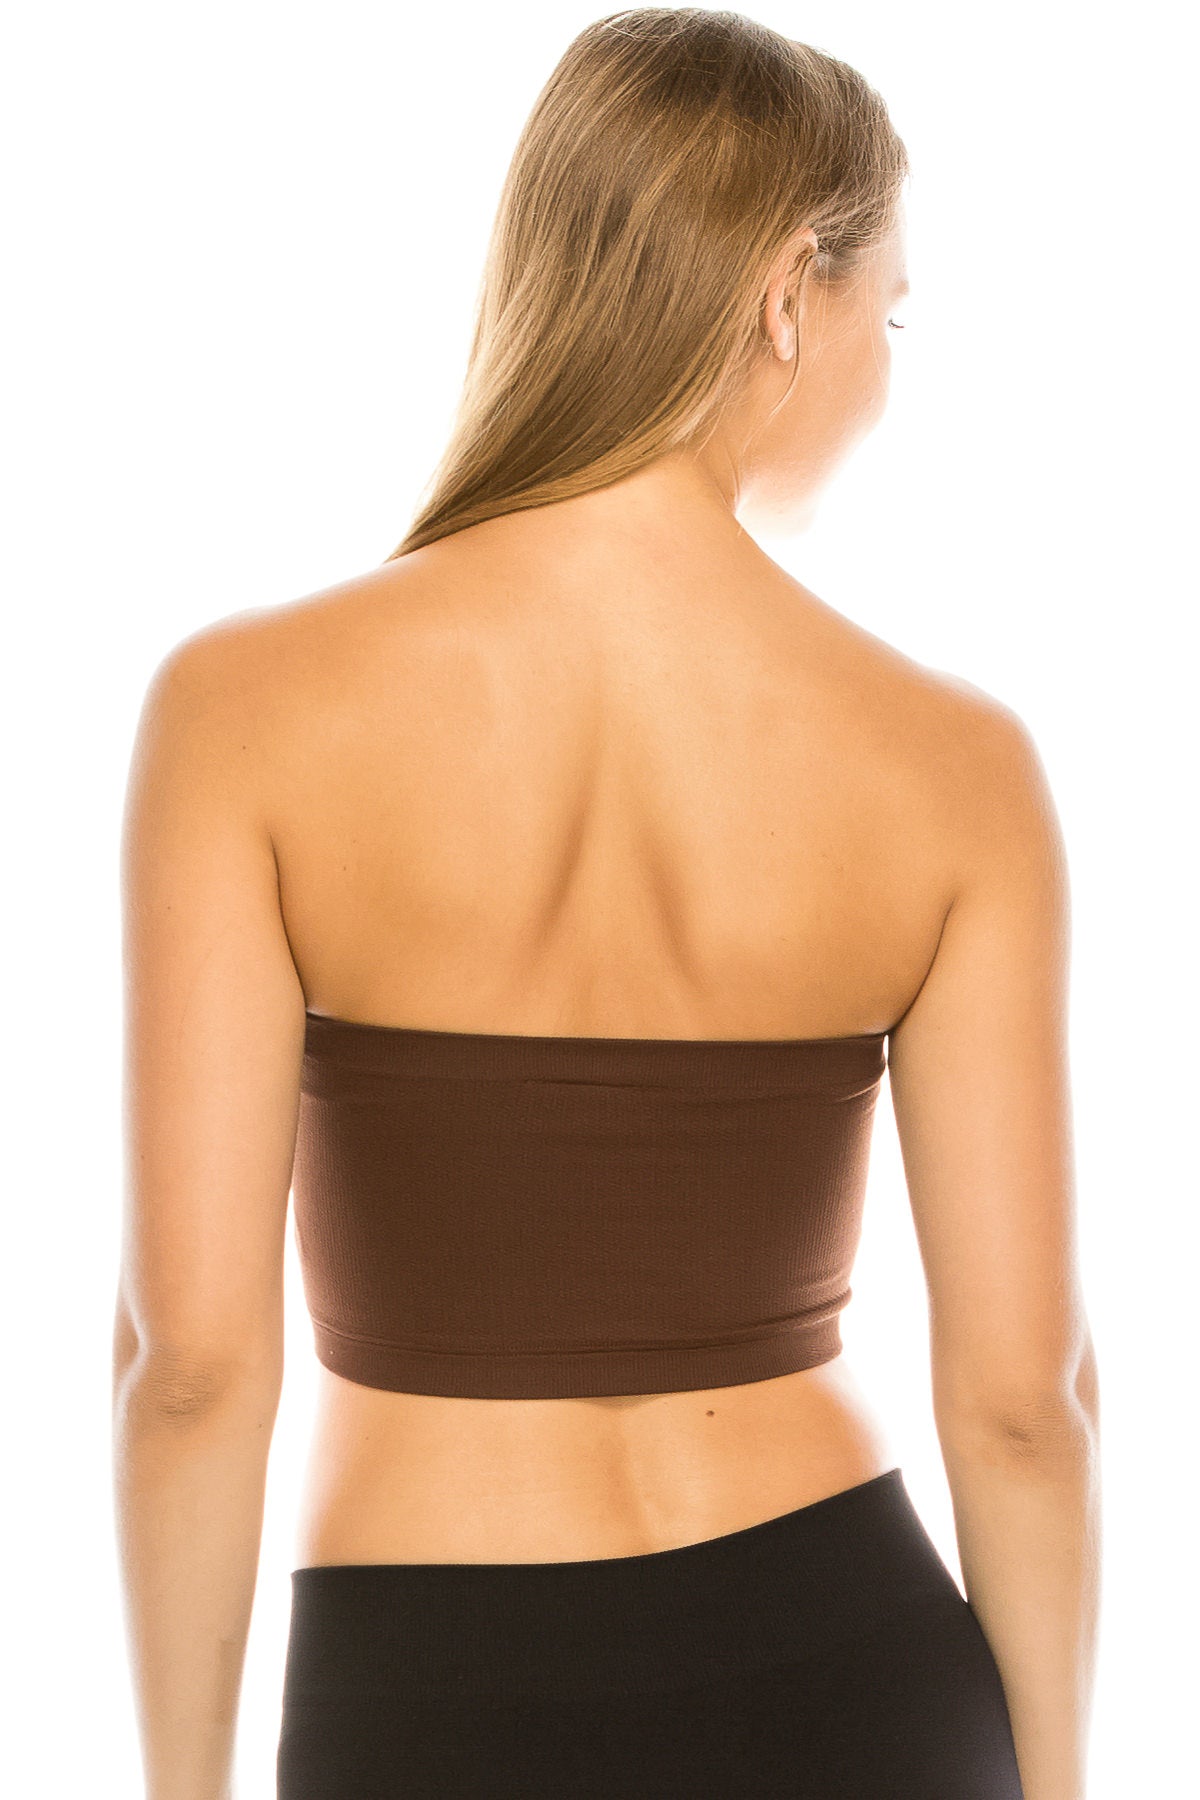 Kurve Premium Seamless Bandeau Tube Top non-padded made in USA -  Canada